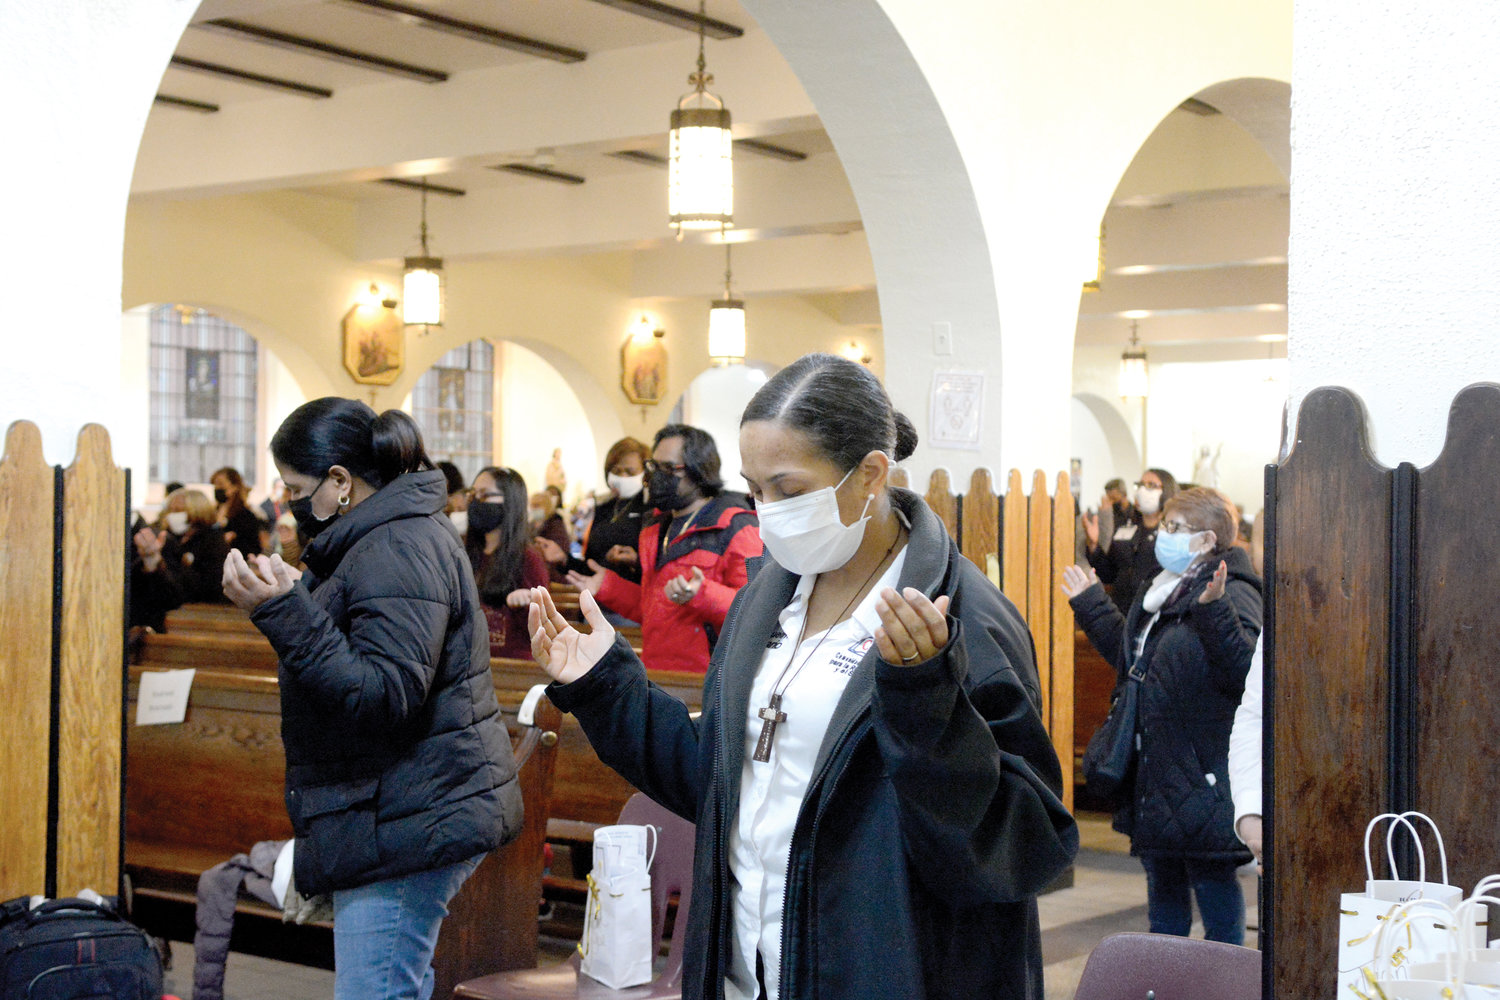 Faithful parishioners pray during the March 20 closing Mass celebrating the 100th anniversary of St. Simon Stock in the Bronx. Auxiliary Bishop Peter Byrne served as principal celebrant and homilist. Founded in 1920, the parish has been administered from the beginning by the Carmelite Friars. The current pastor is Father Michael Kissane, O. Carm.